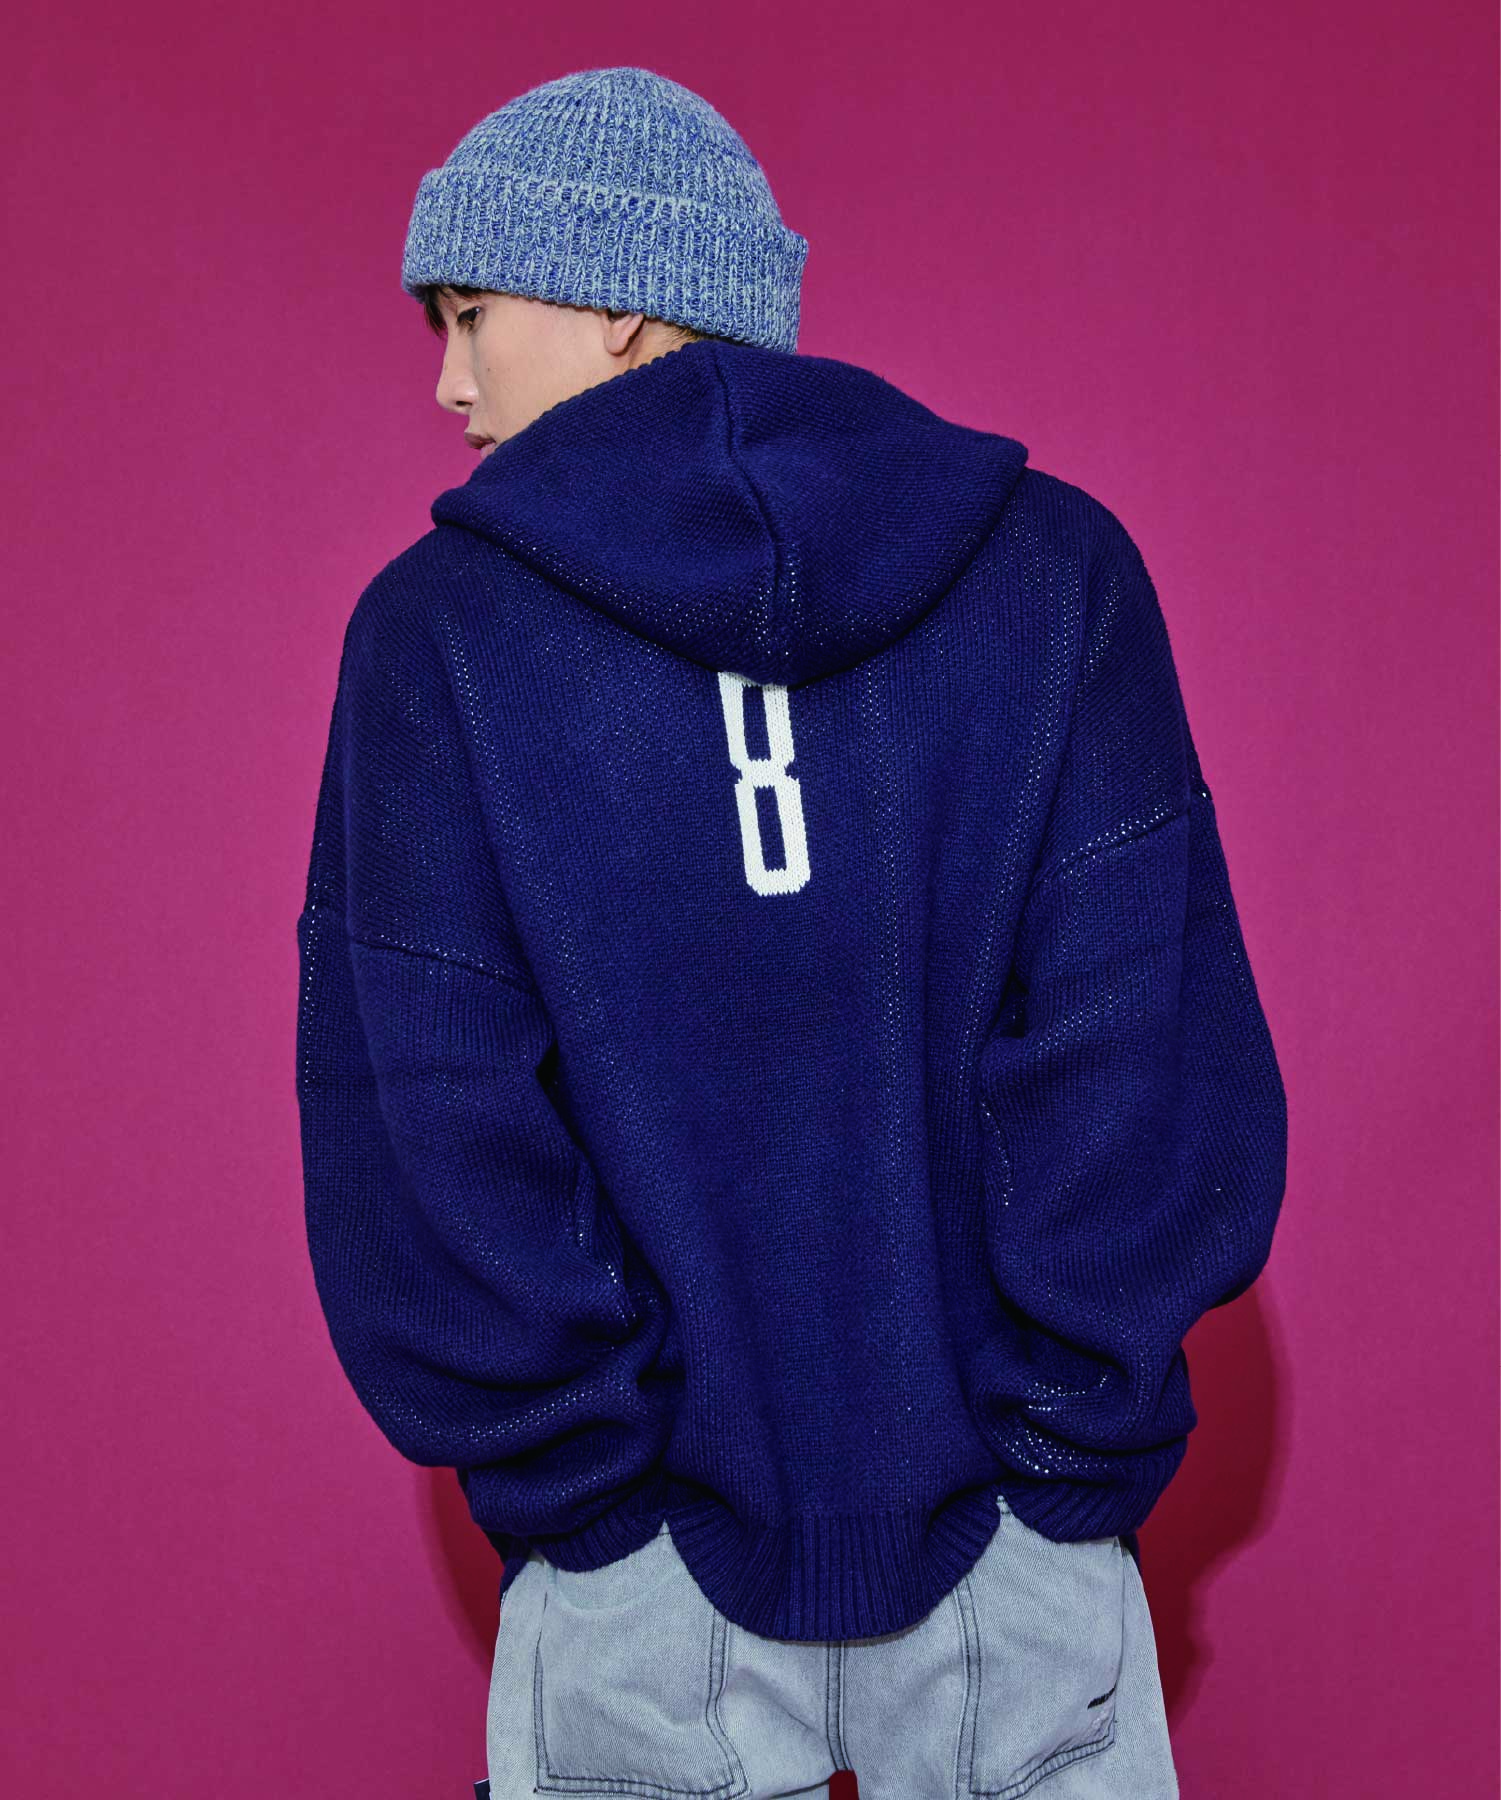 BEENTRILL X BROOKLYNDENIMCO OVERFIT HOODED KNIT SANS 니트후드 (NAVY)